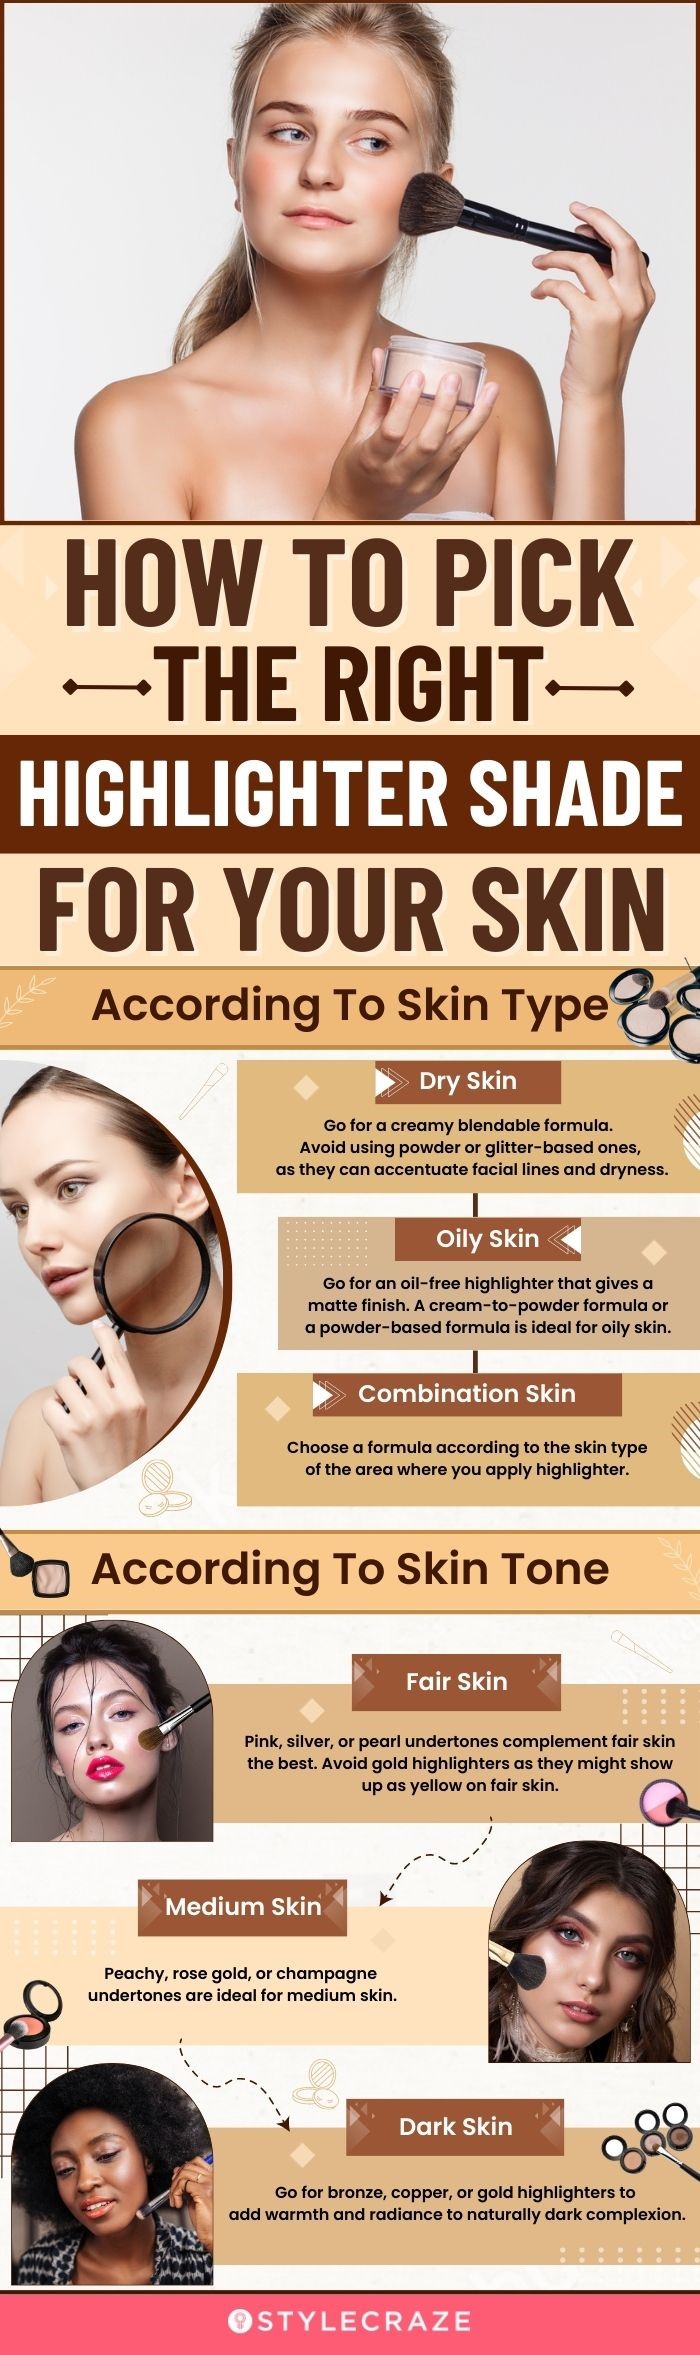 Best Highlighter For Different Skin Types And Skin Complexion (infographic)